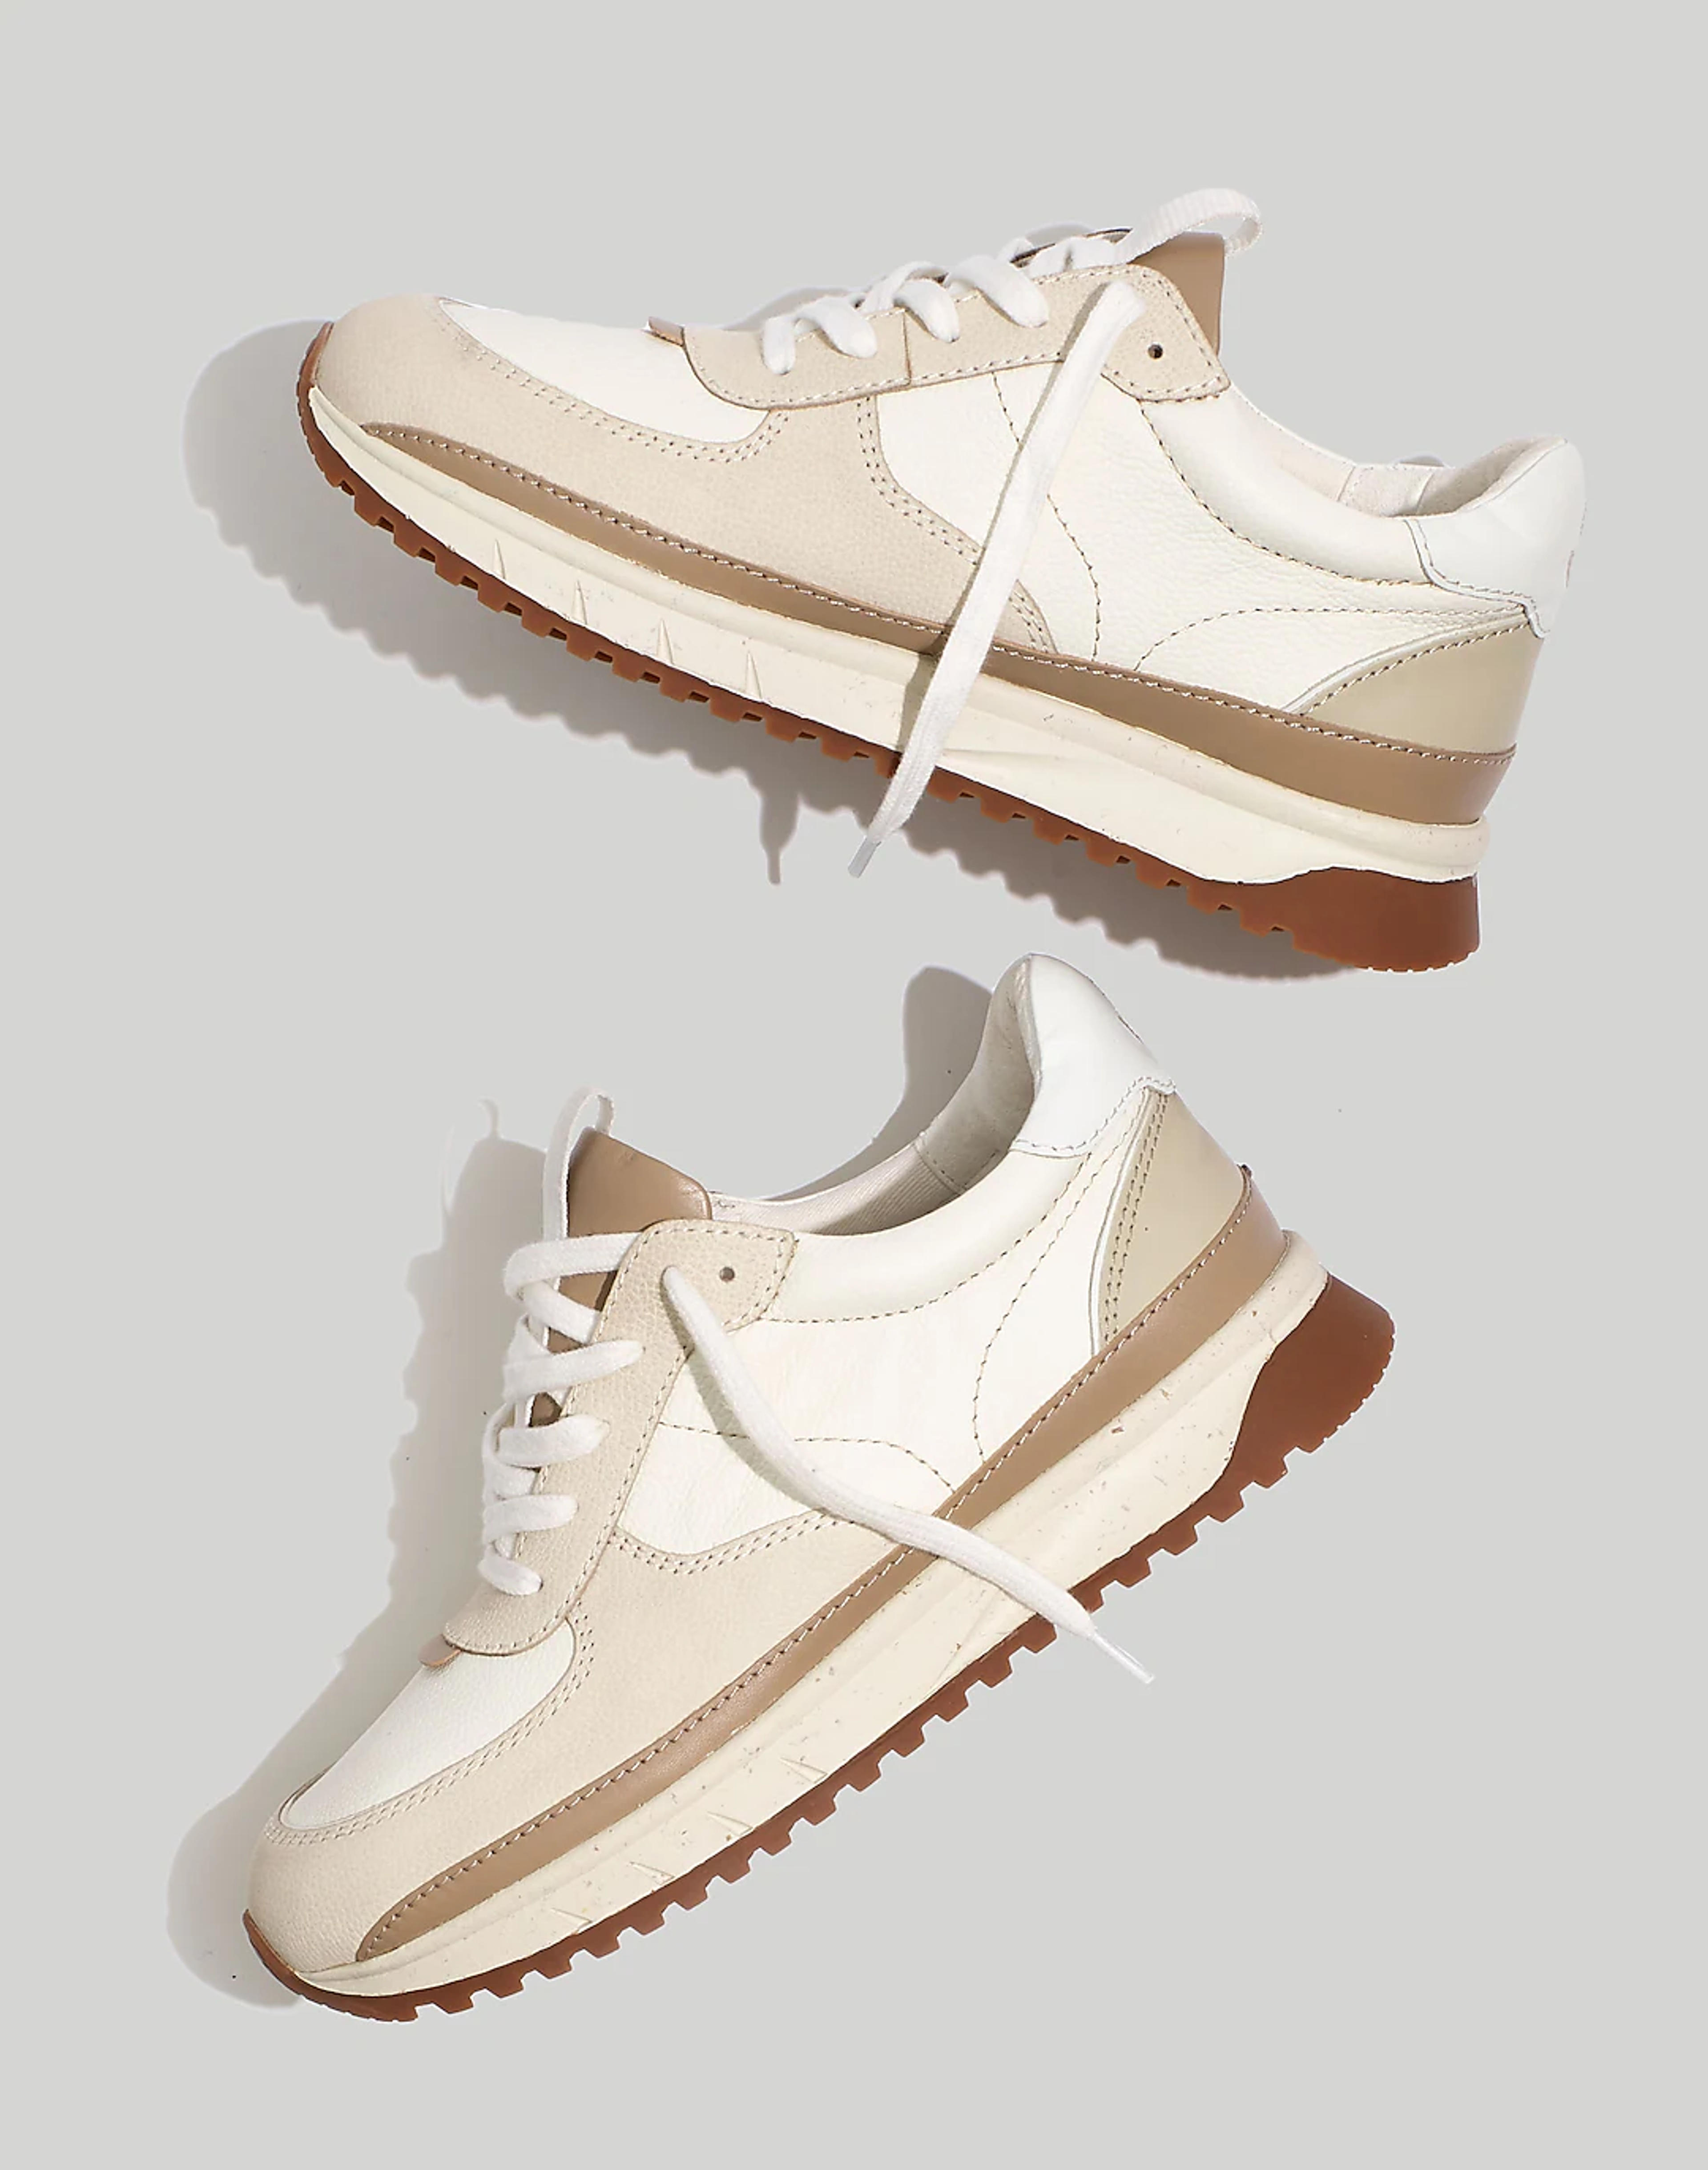 Women's Kickoff Trainer Sneakers in Leather | Madewell